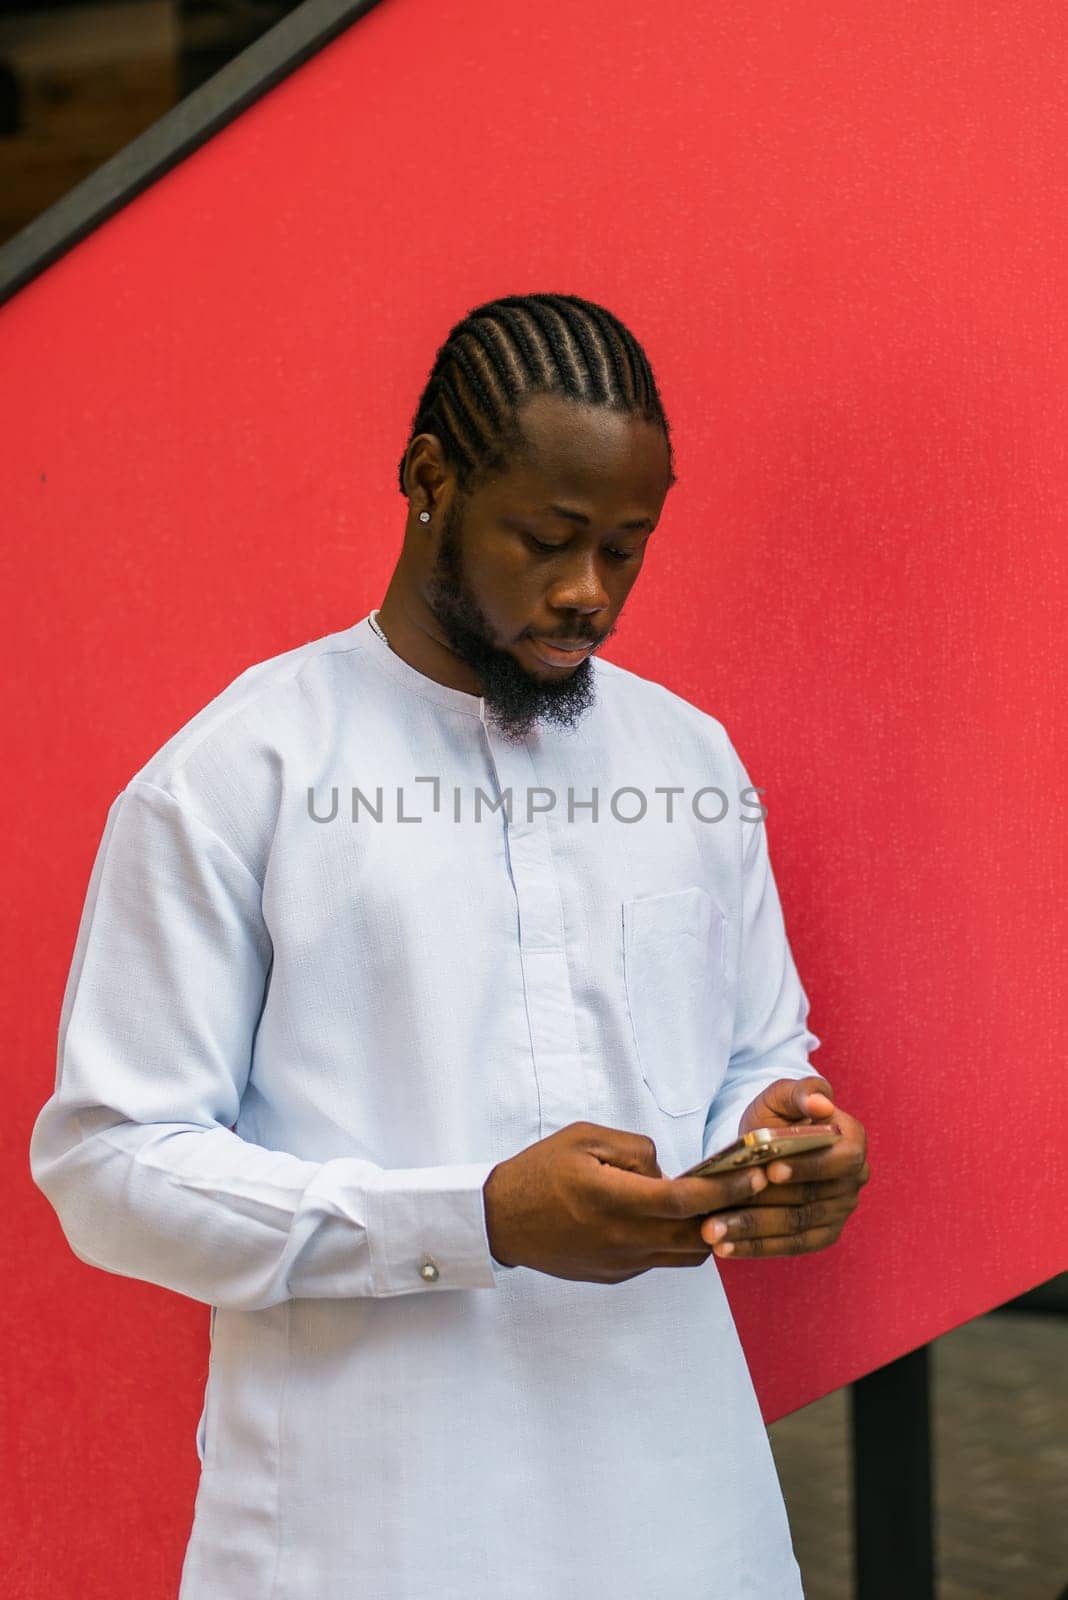 Millennial generation african american man typing sms outdoor 5g internet concept. High speed internet on phone and chatting on social networks and blog concept by Satura86